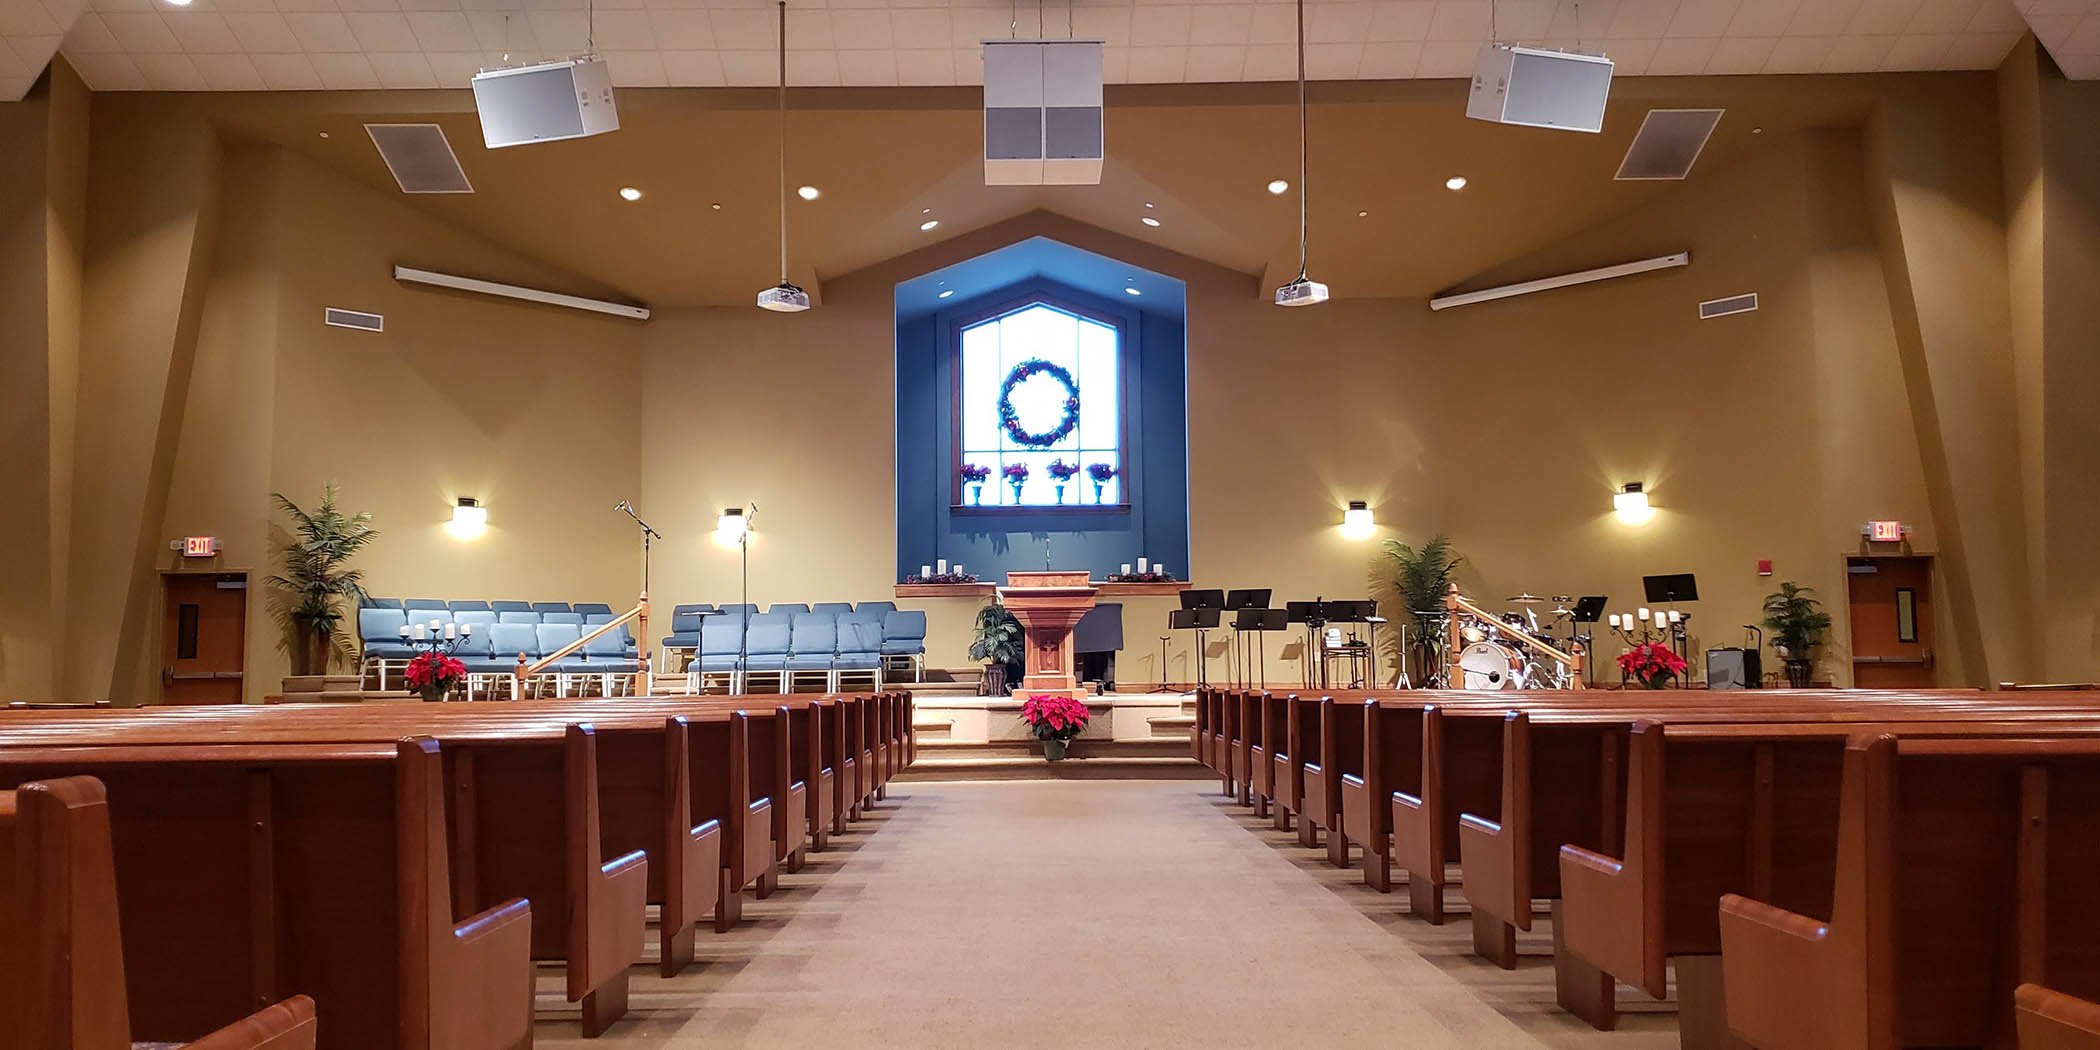 Summit Woods Baptist Church Benefits From Danley Sound Lab Fidelity,  Pattern Control, and Small Footprint | Live Design Online